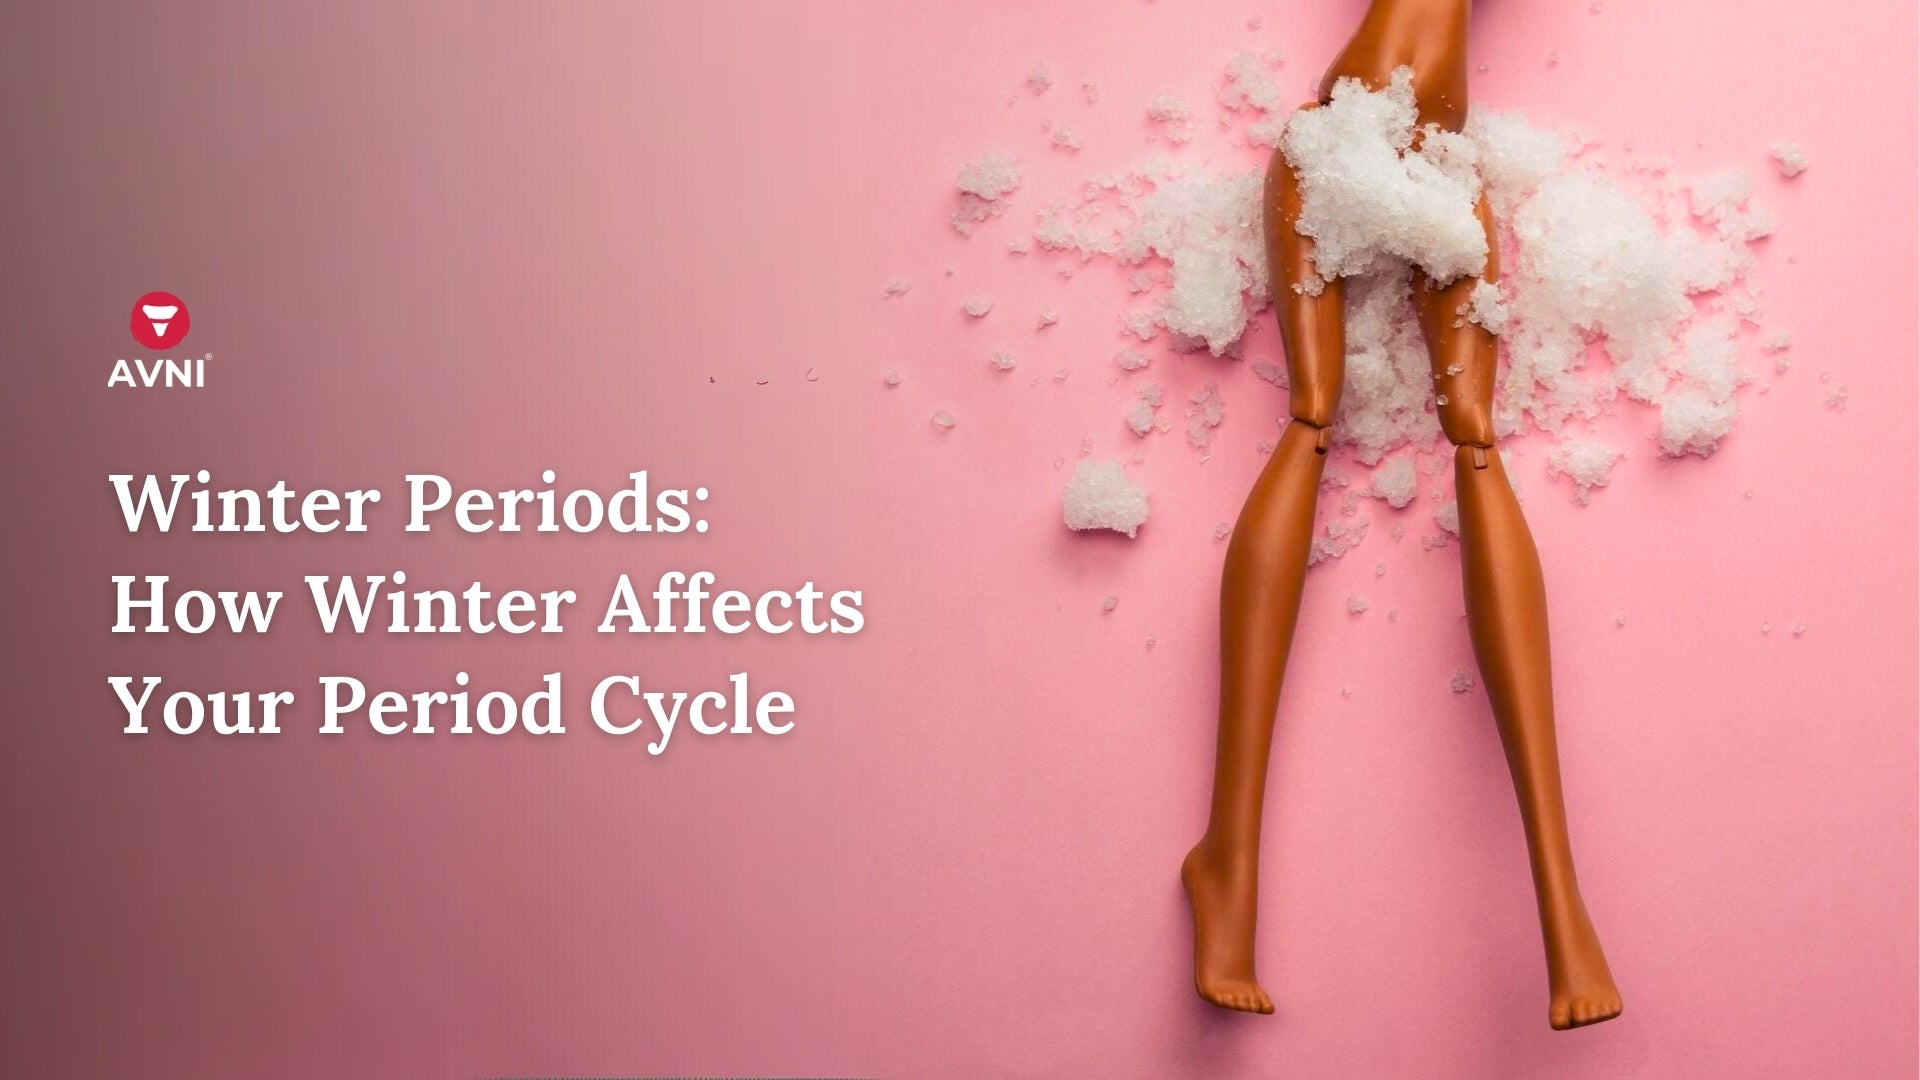 Winter Periods: How Winter Affects Your Period Cycle